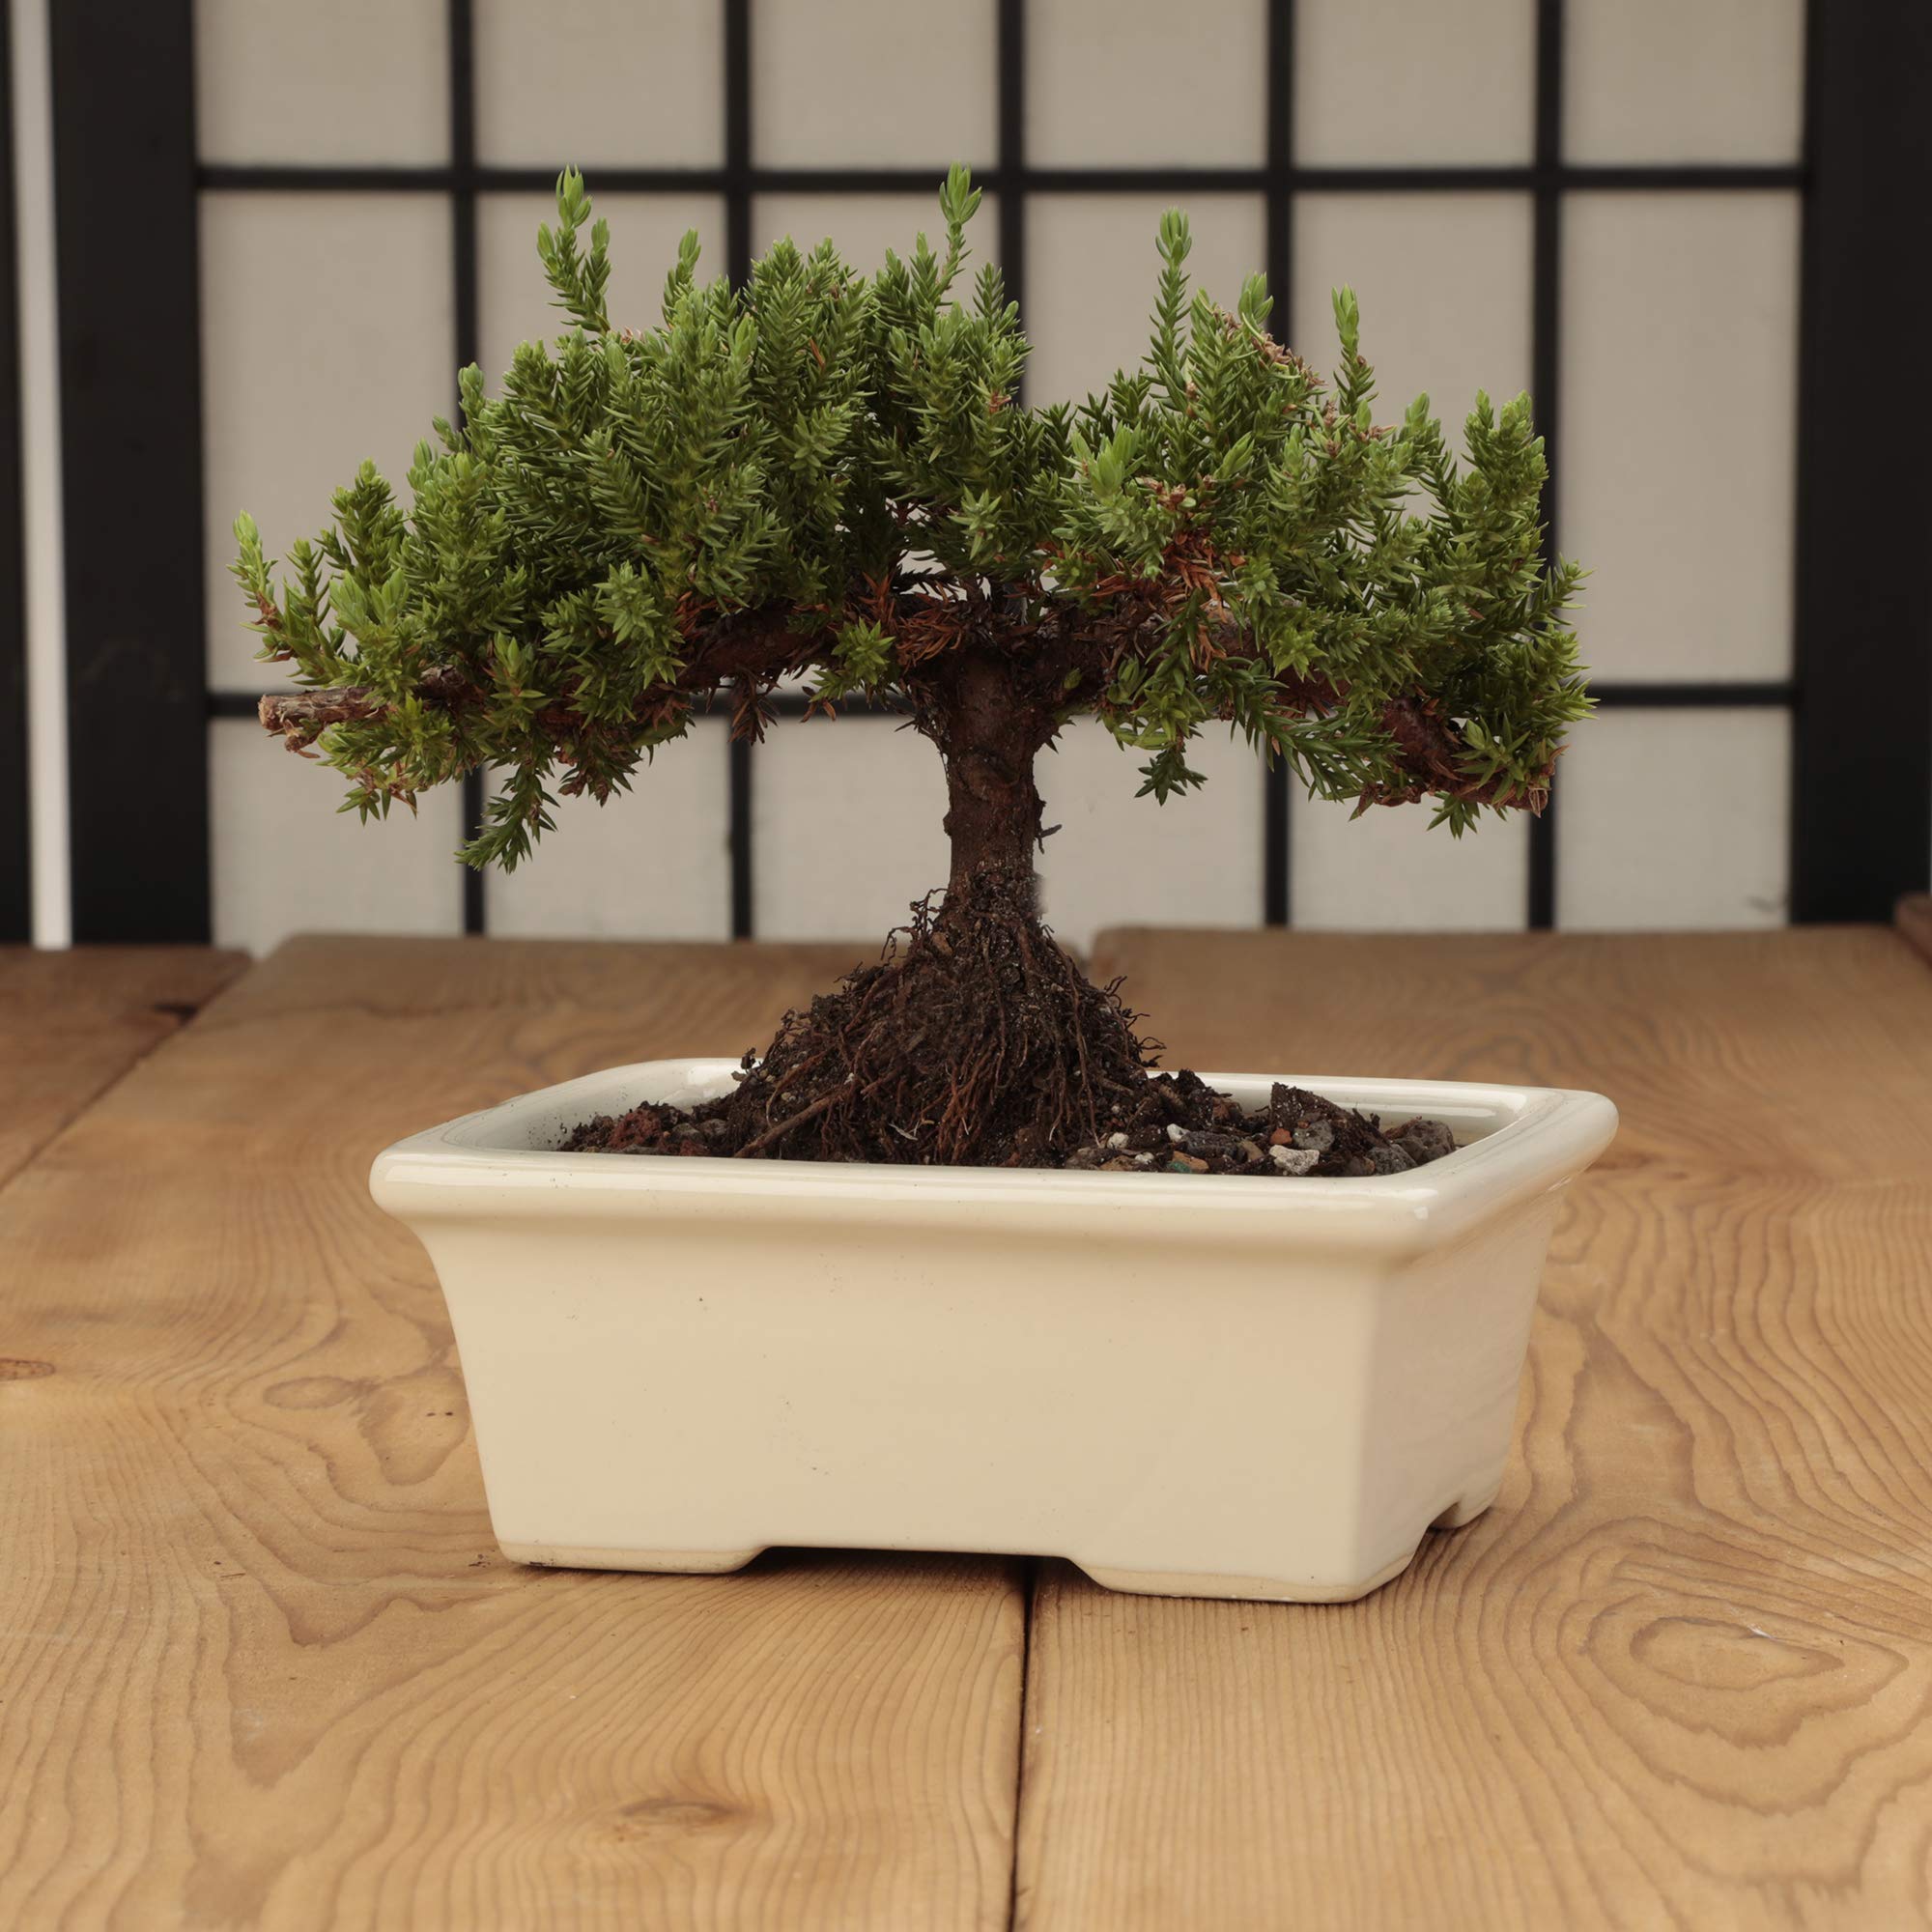 Glazed Ceramic Bonsai Pot - Decorative Planter for Dwarf Trees, Succulents, Small Plants - Perfect Pot for Indoor and Outdoor Gardens, Table Centerpieces and Windowsill Decor - White Rectangle  - Like New